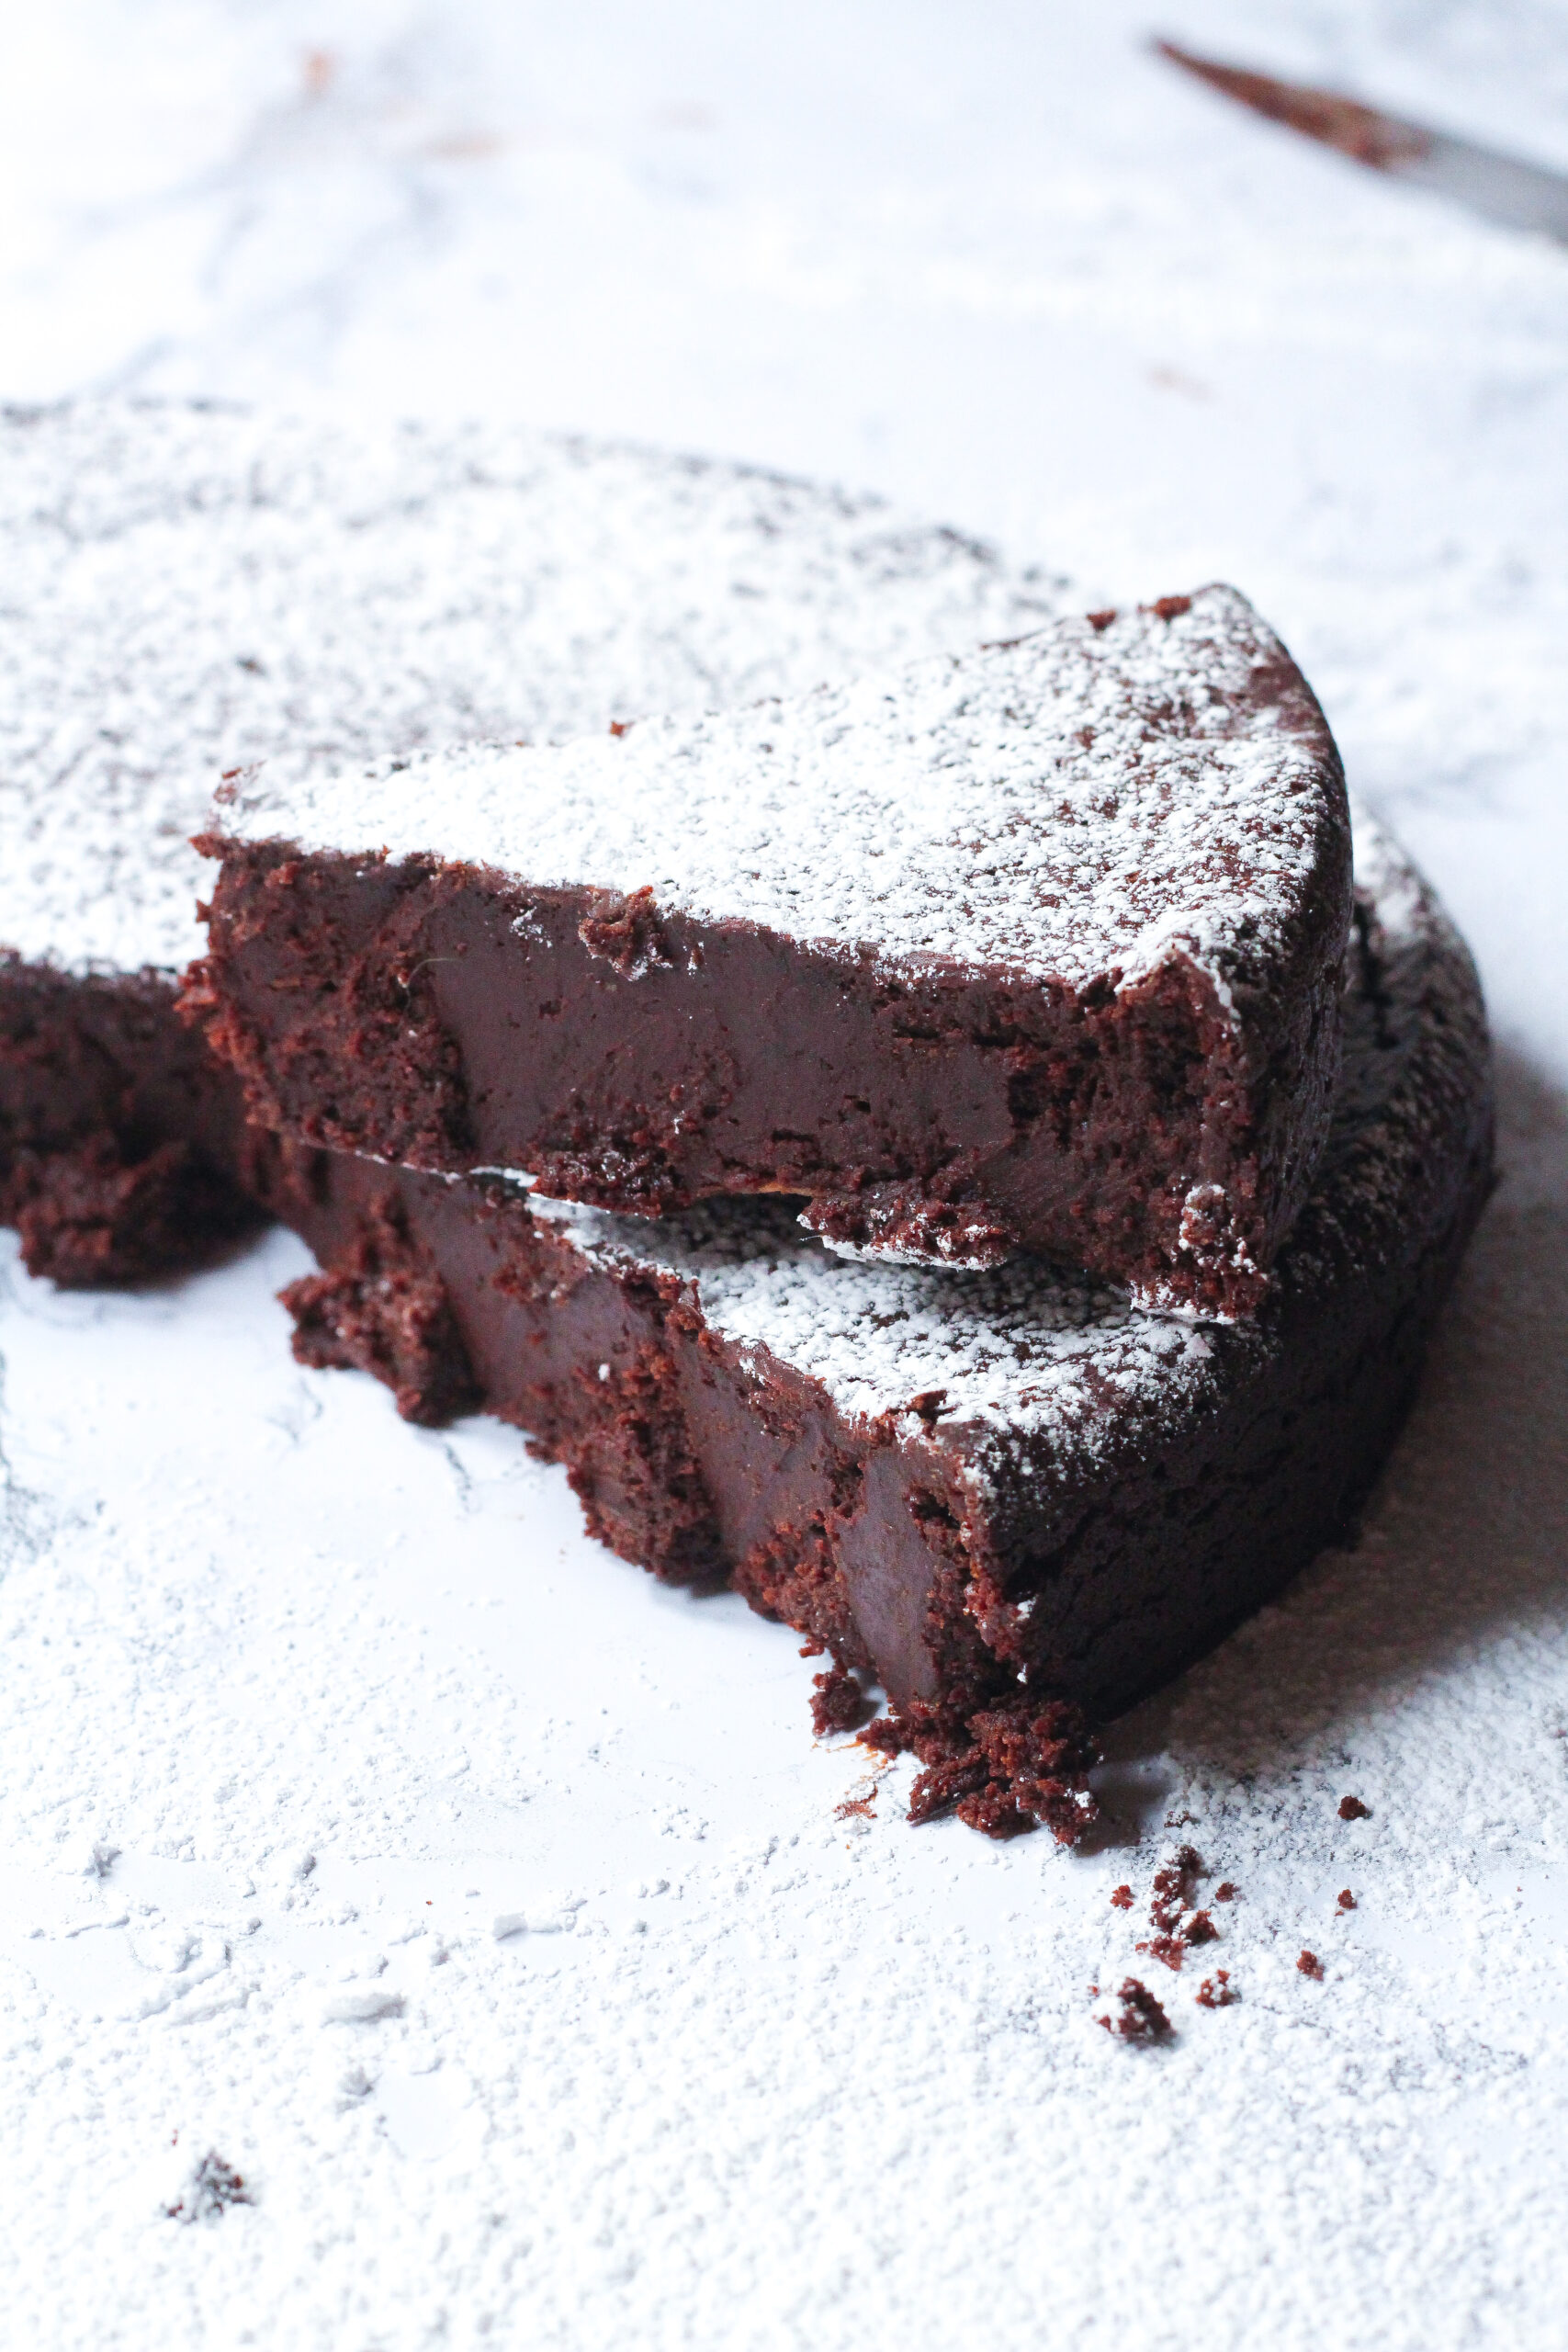 a slice of red wine flourless chocolate cake sitting on top of the remainder of the remainder of the cake from which the slice was removed, but slightly angled so that it doesn't line up exactly with the cake. The cake and the slice are dusted with powdered sugar.